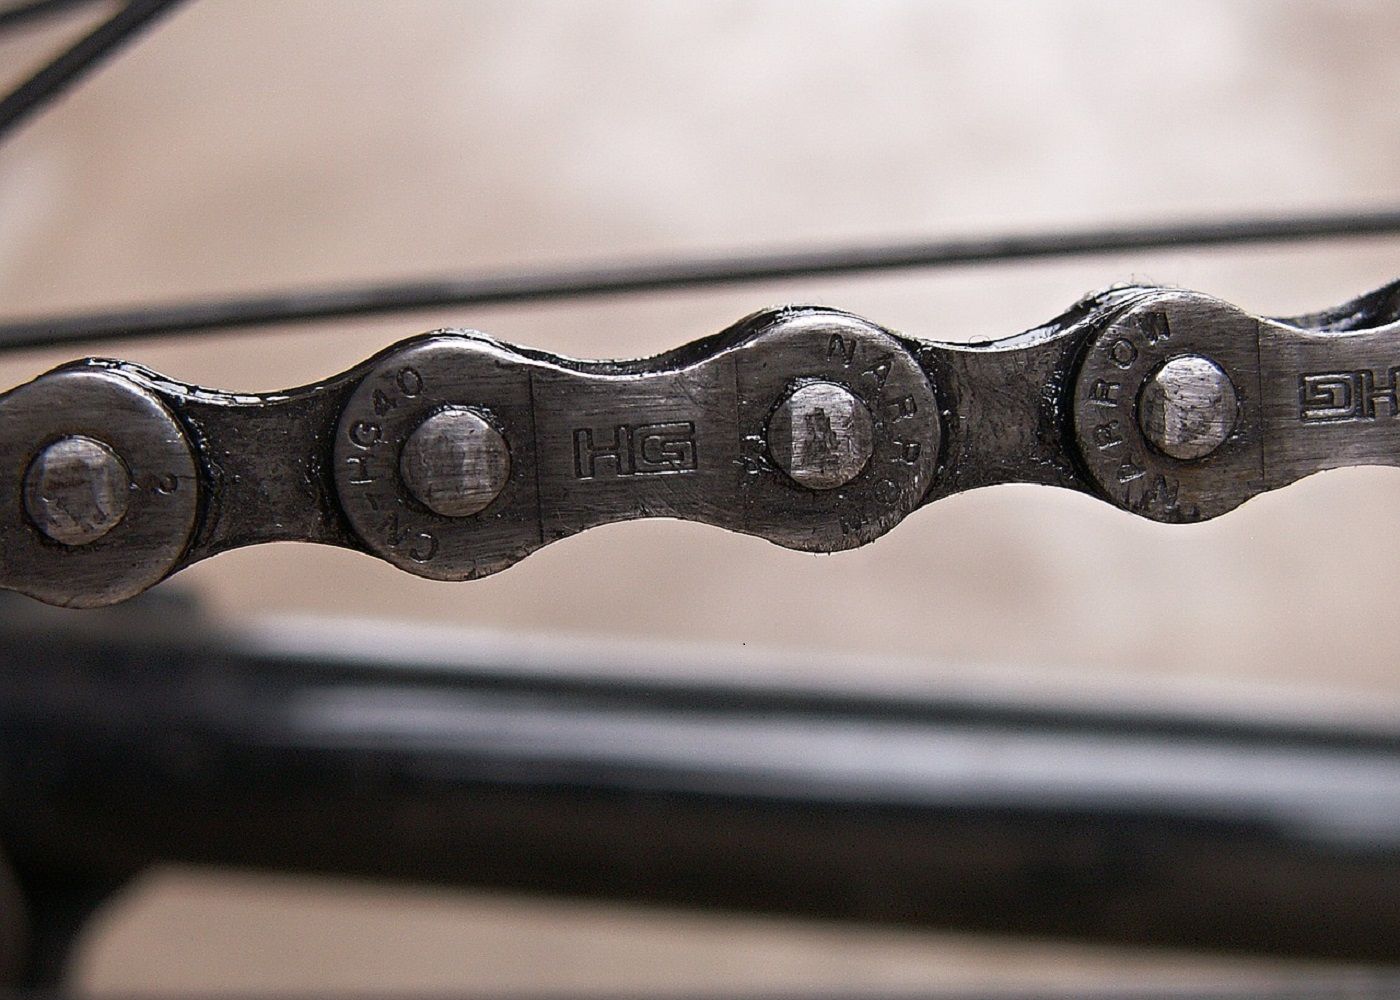 removing a bike chain without tool